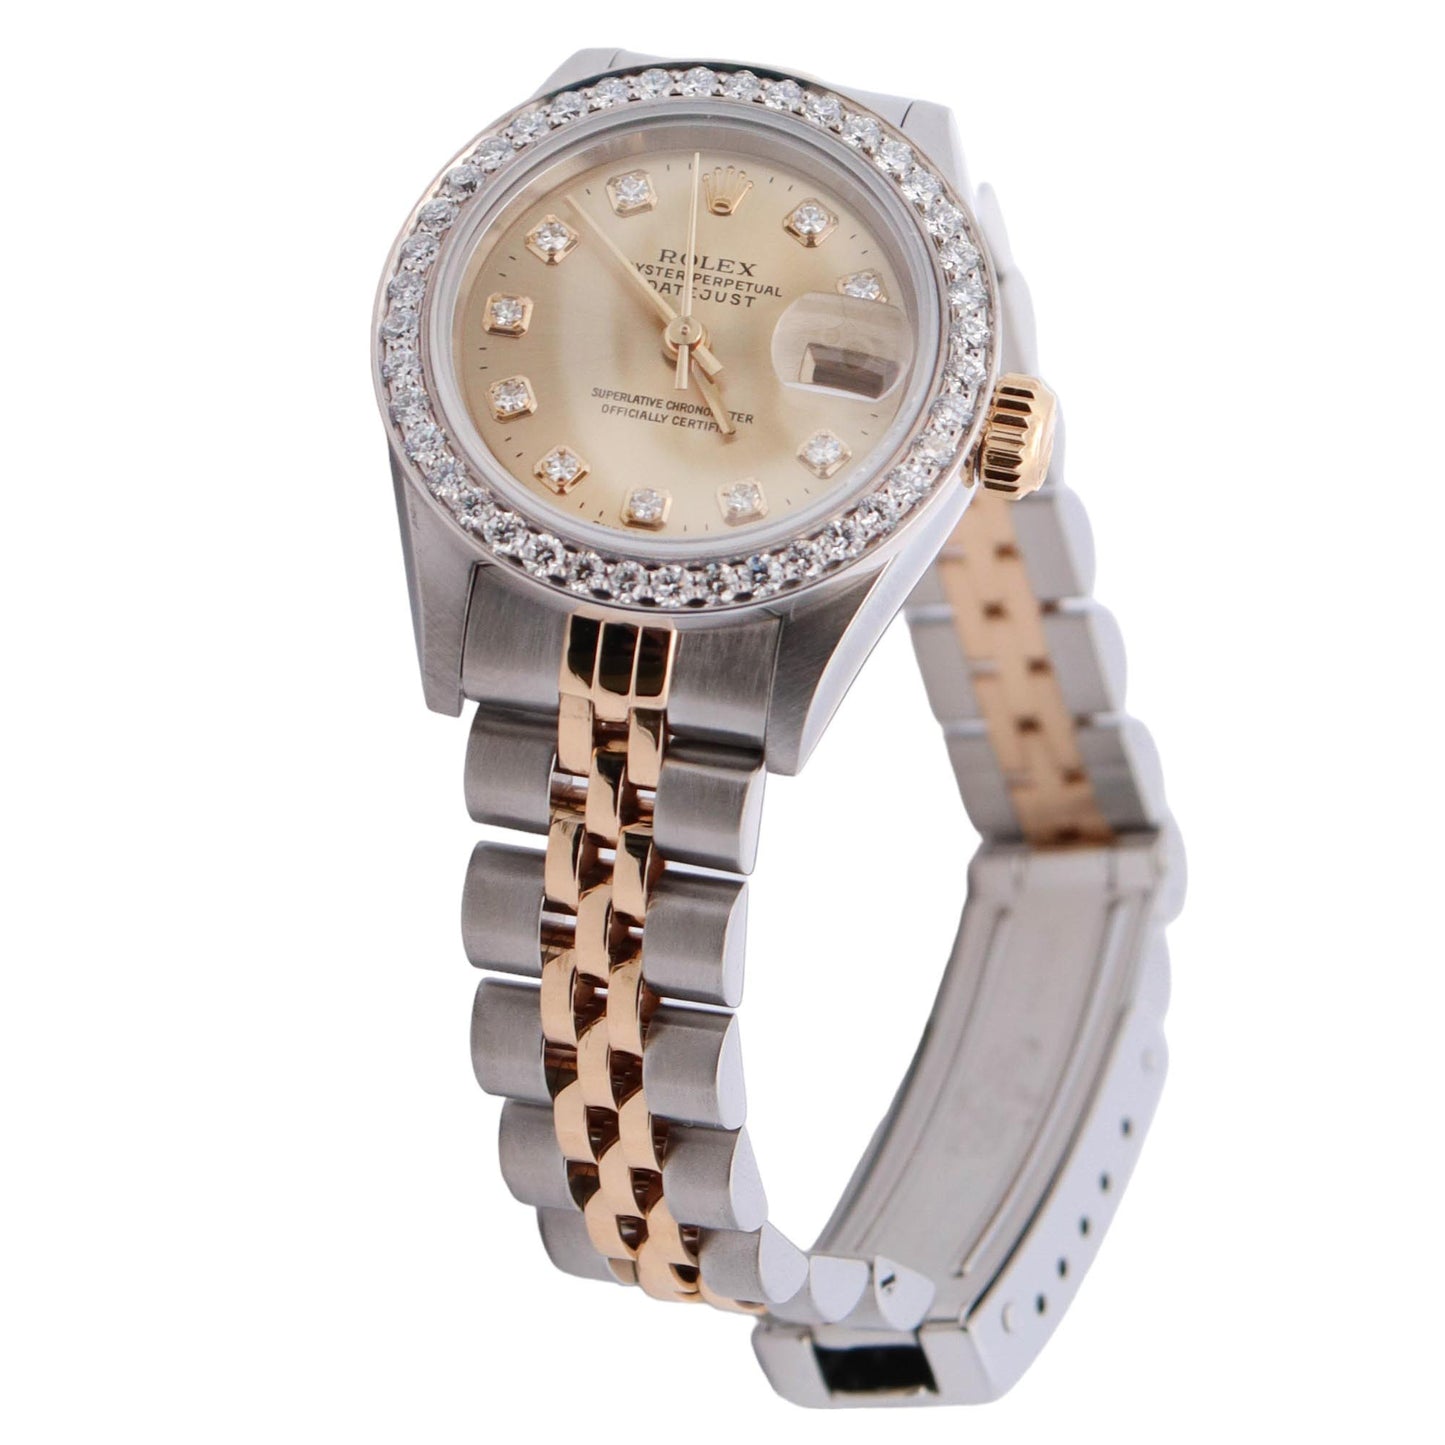 Rolex Datejust Two Tone Yellow Gold & Stainless Steel 26mm Champagne Diamond Dial Watch Reference #: 69173 - Happy Jewelers Fine Jewelry Lifetime Warranty